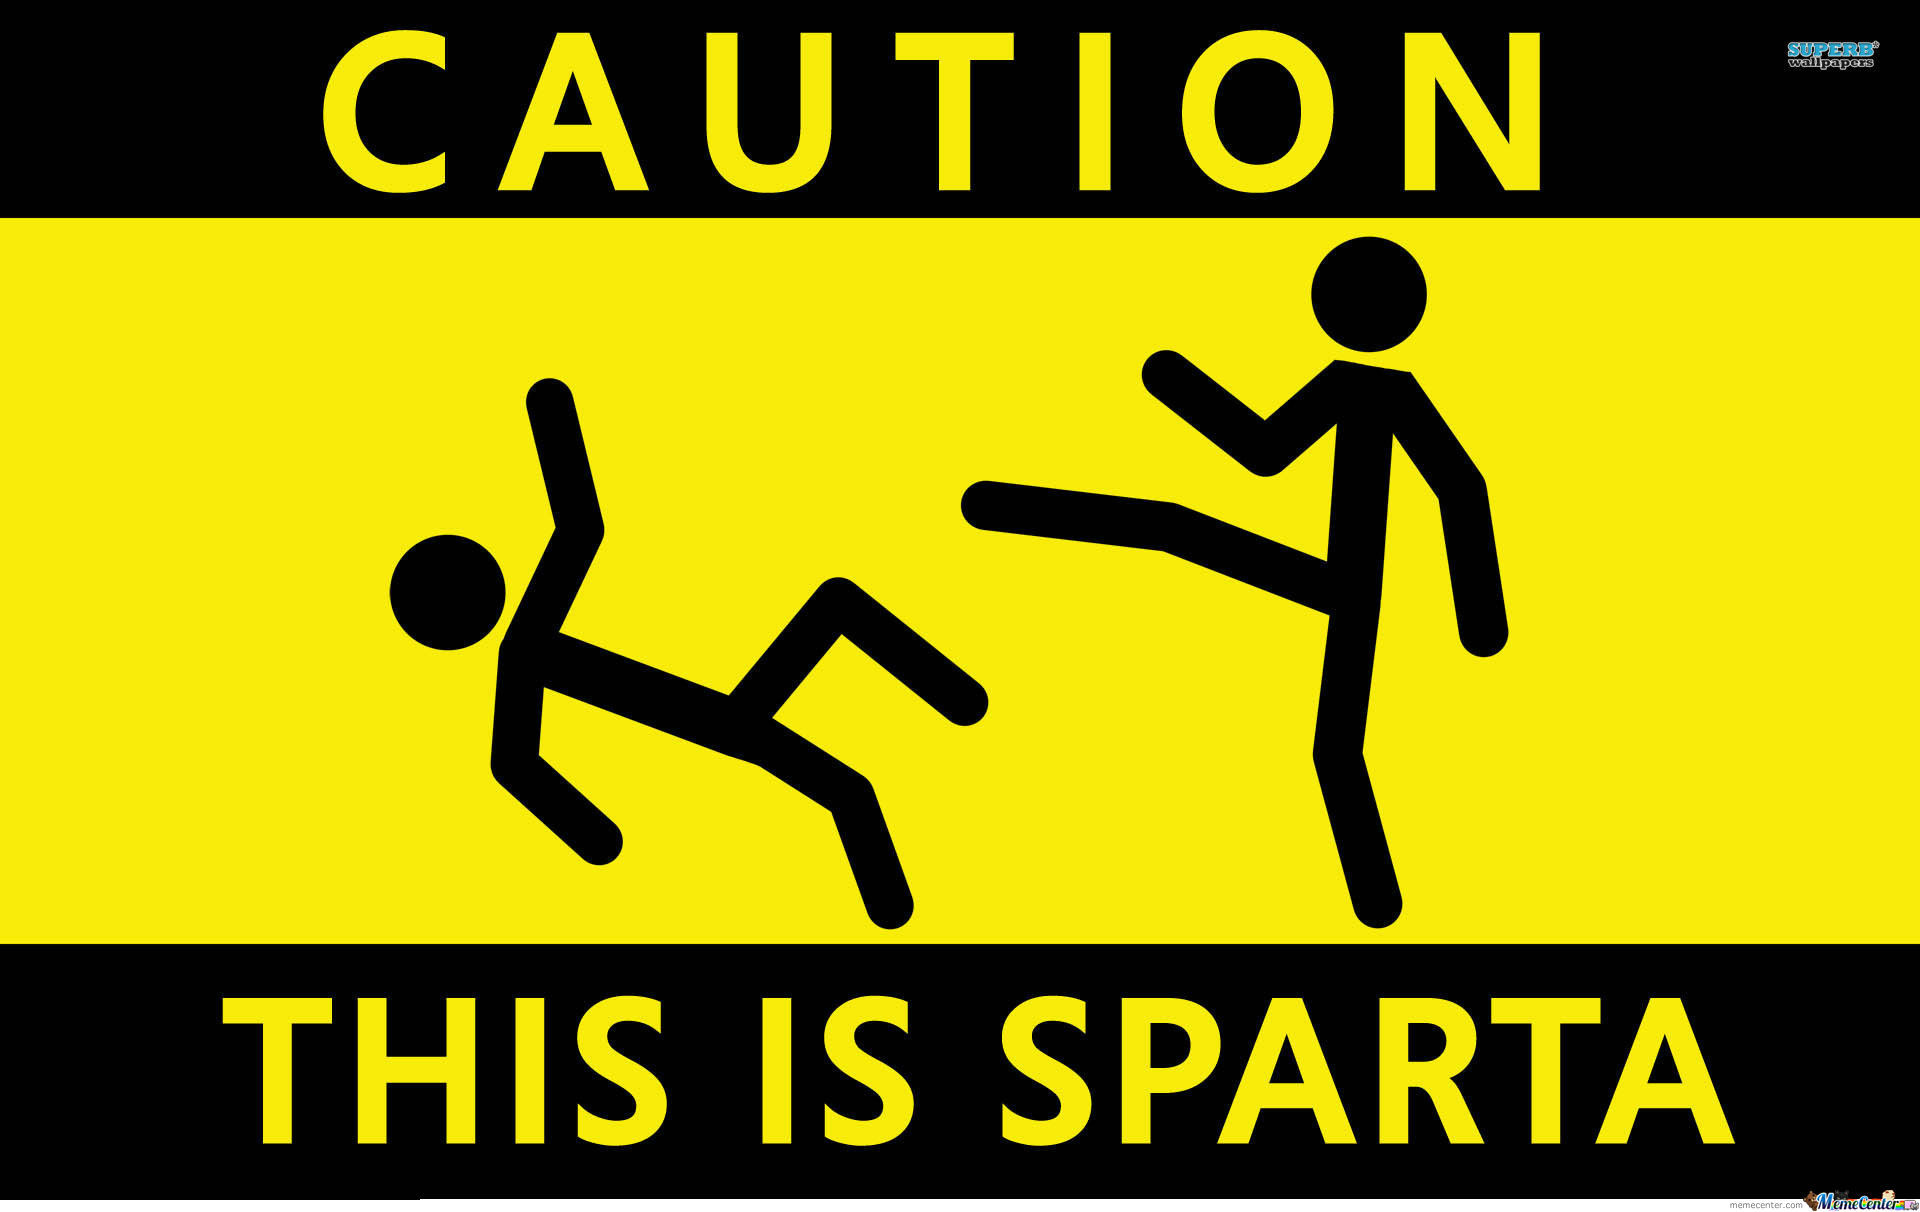 Caution This Is Sparta Image Crazy Gallery